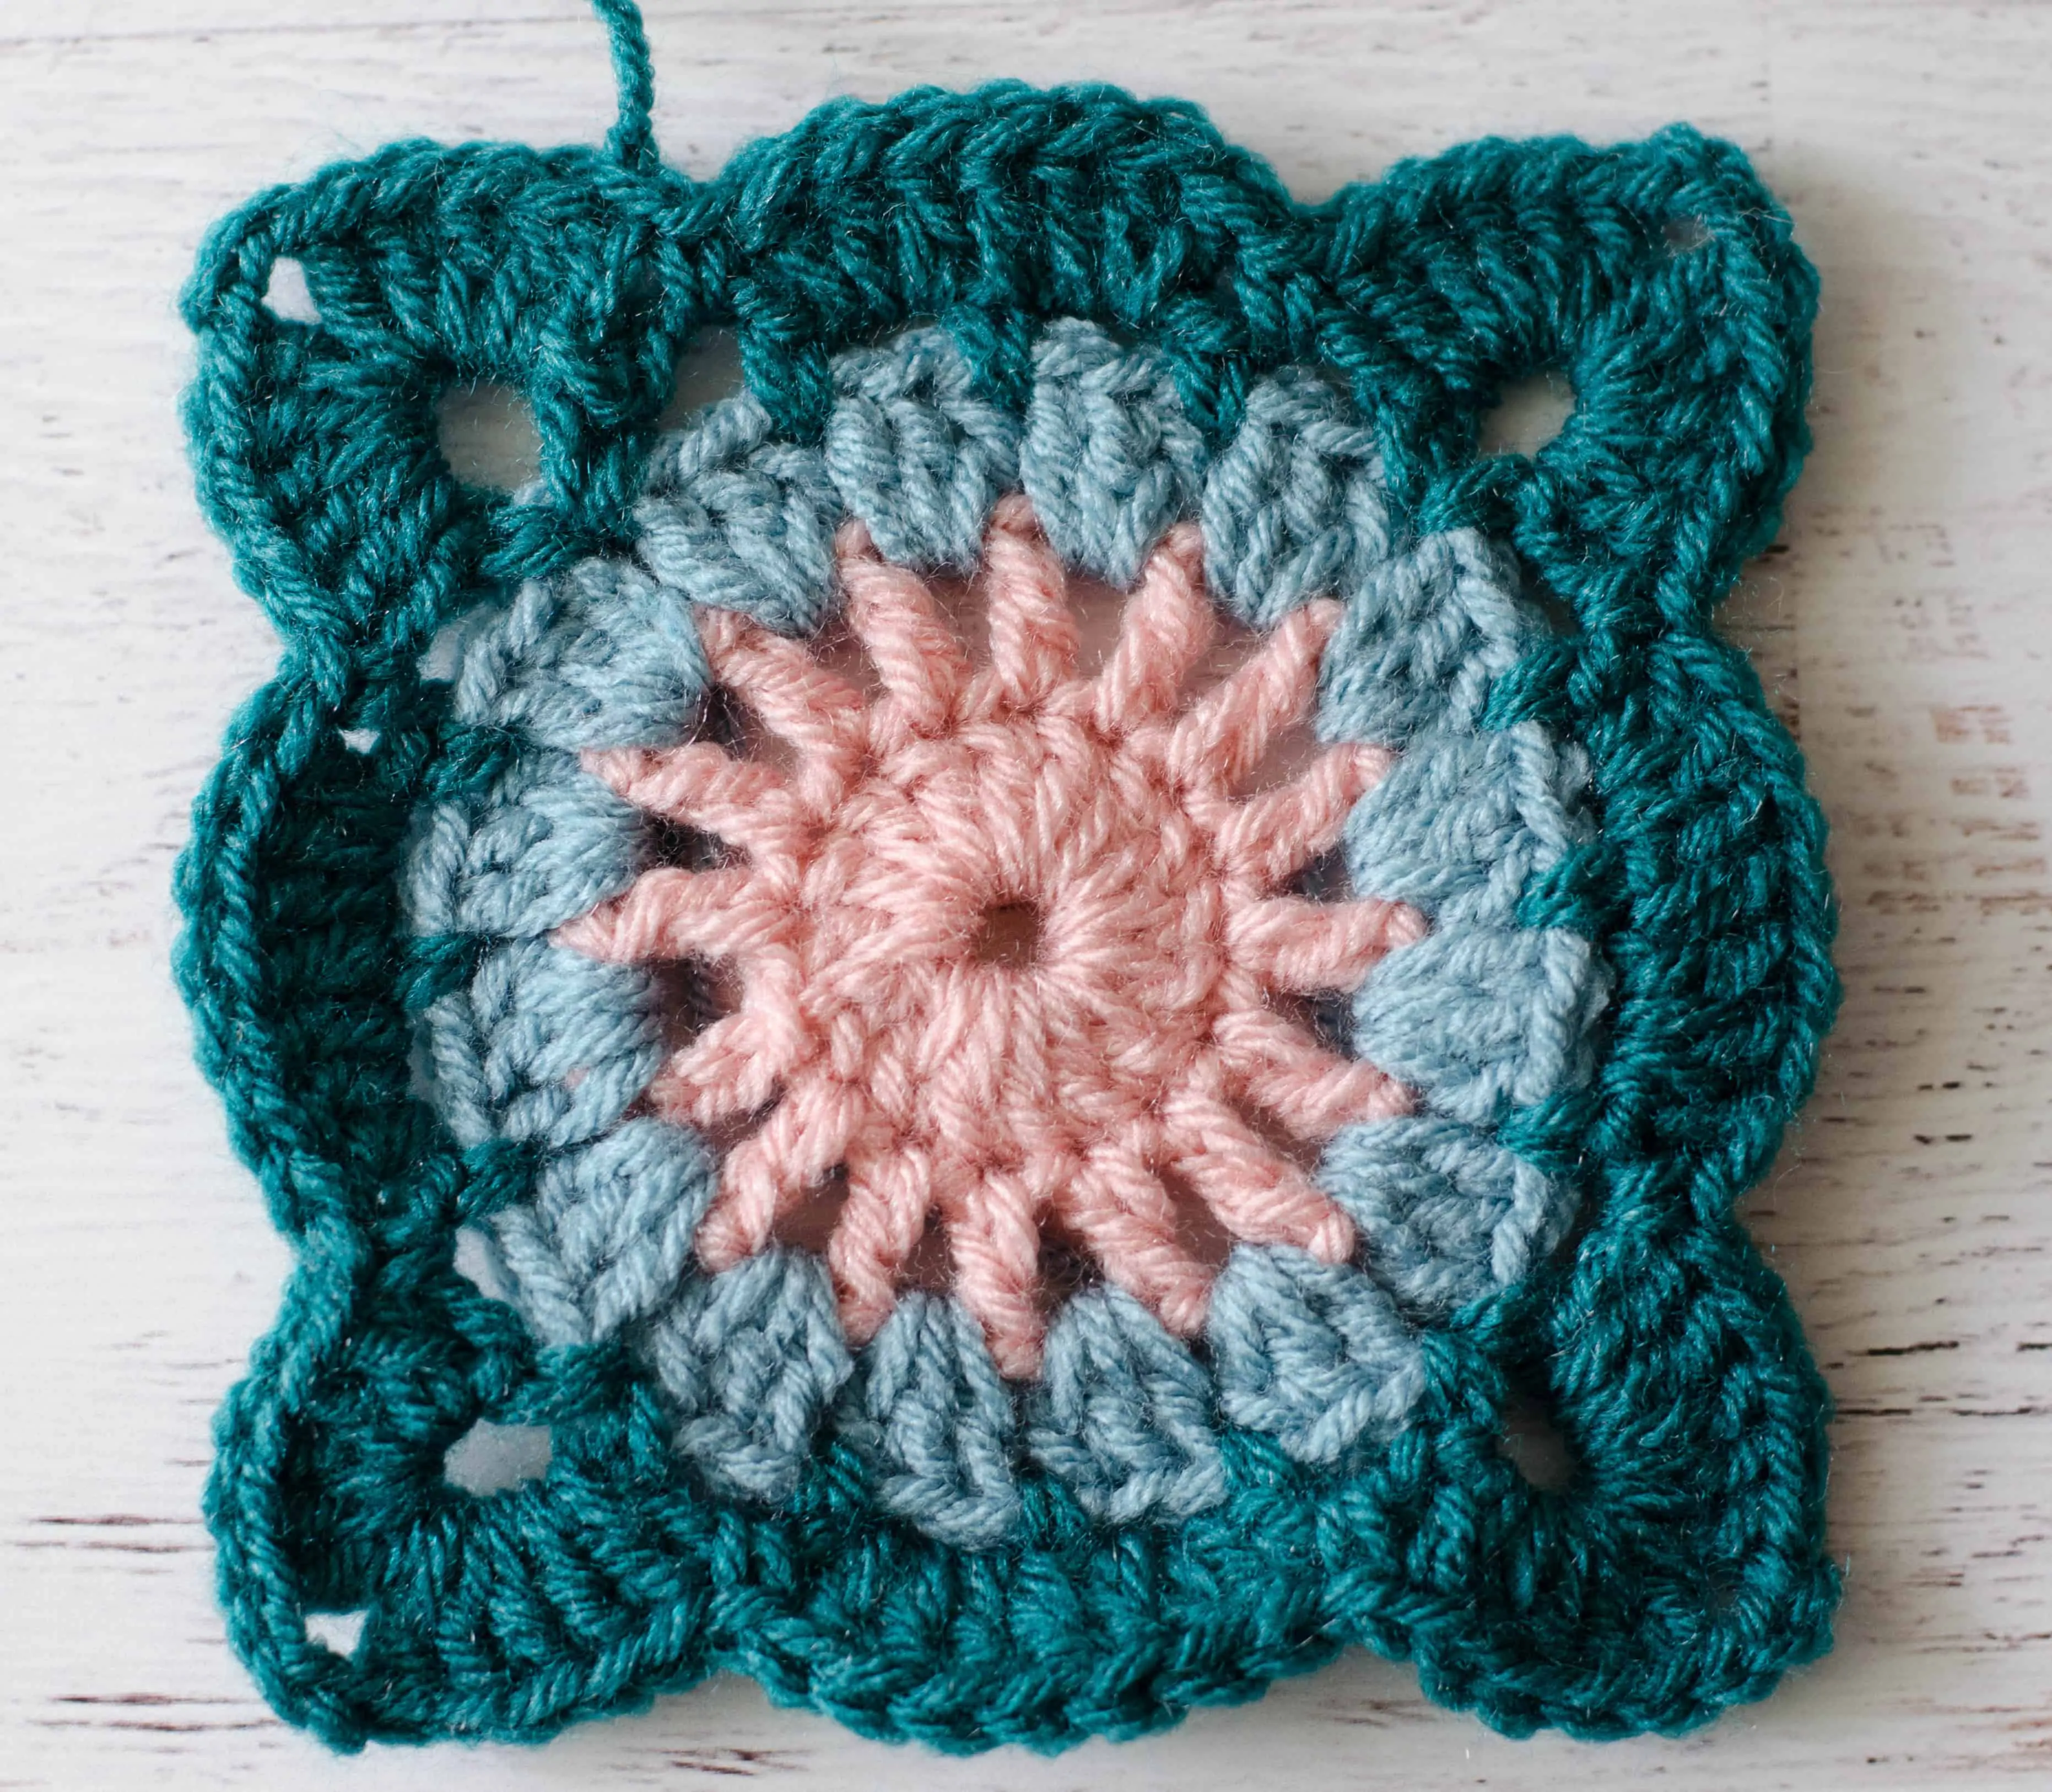 Crochet motif in pink, blue and teal